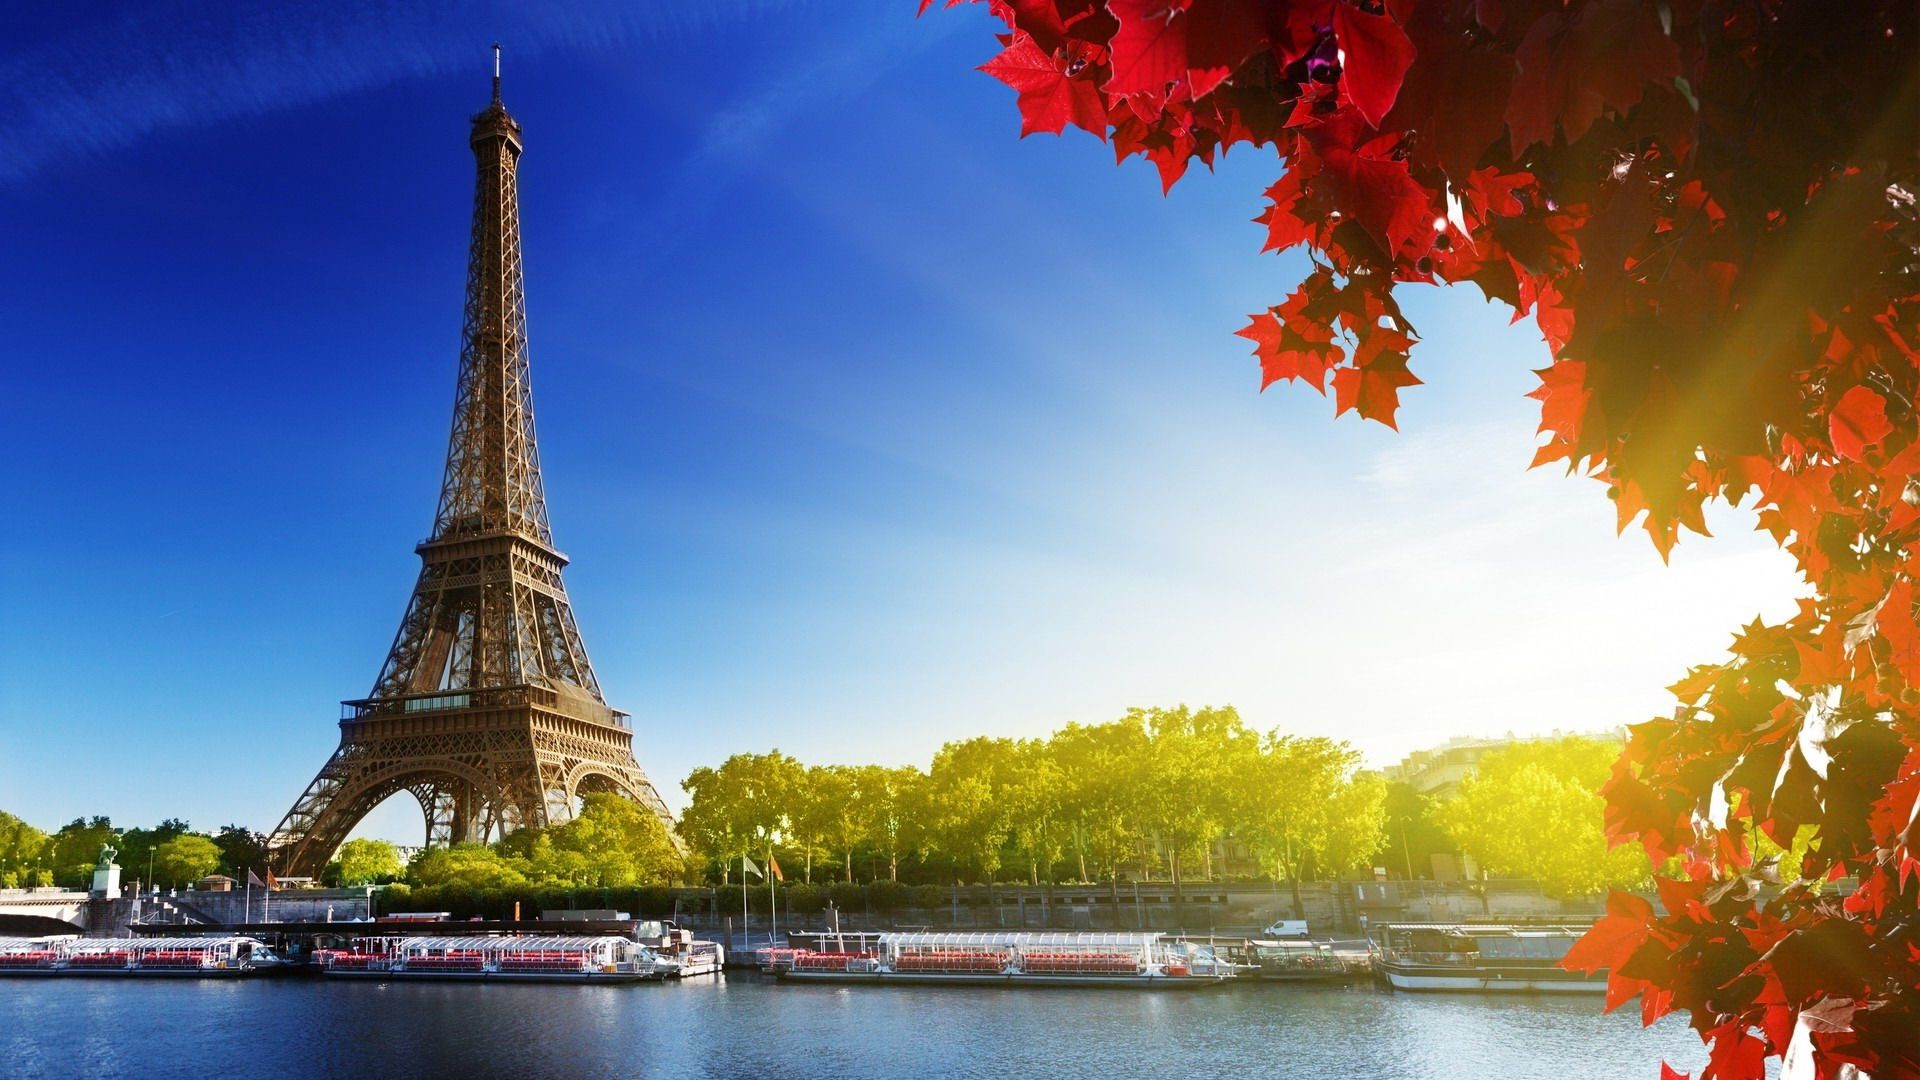 France Eiffel Tow HD Wallpaper Background Image